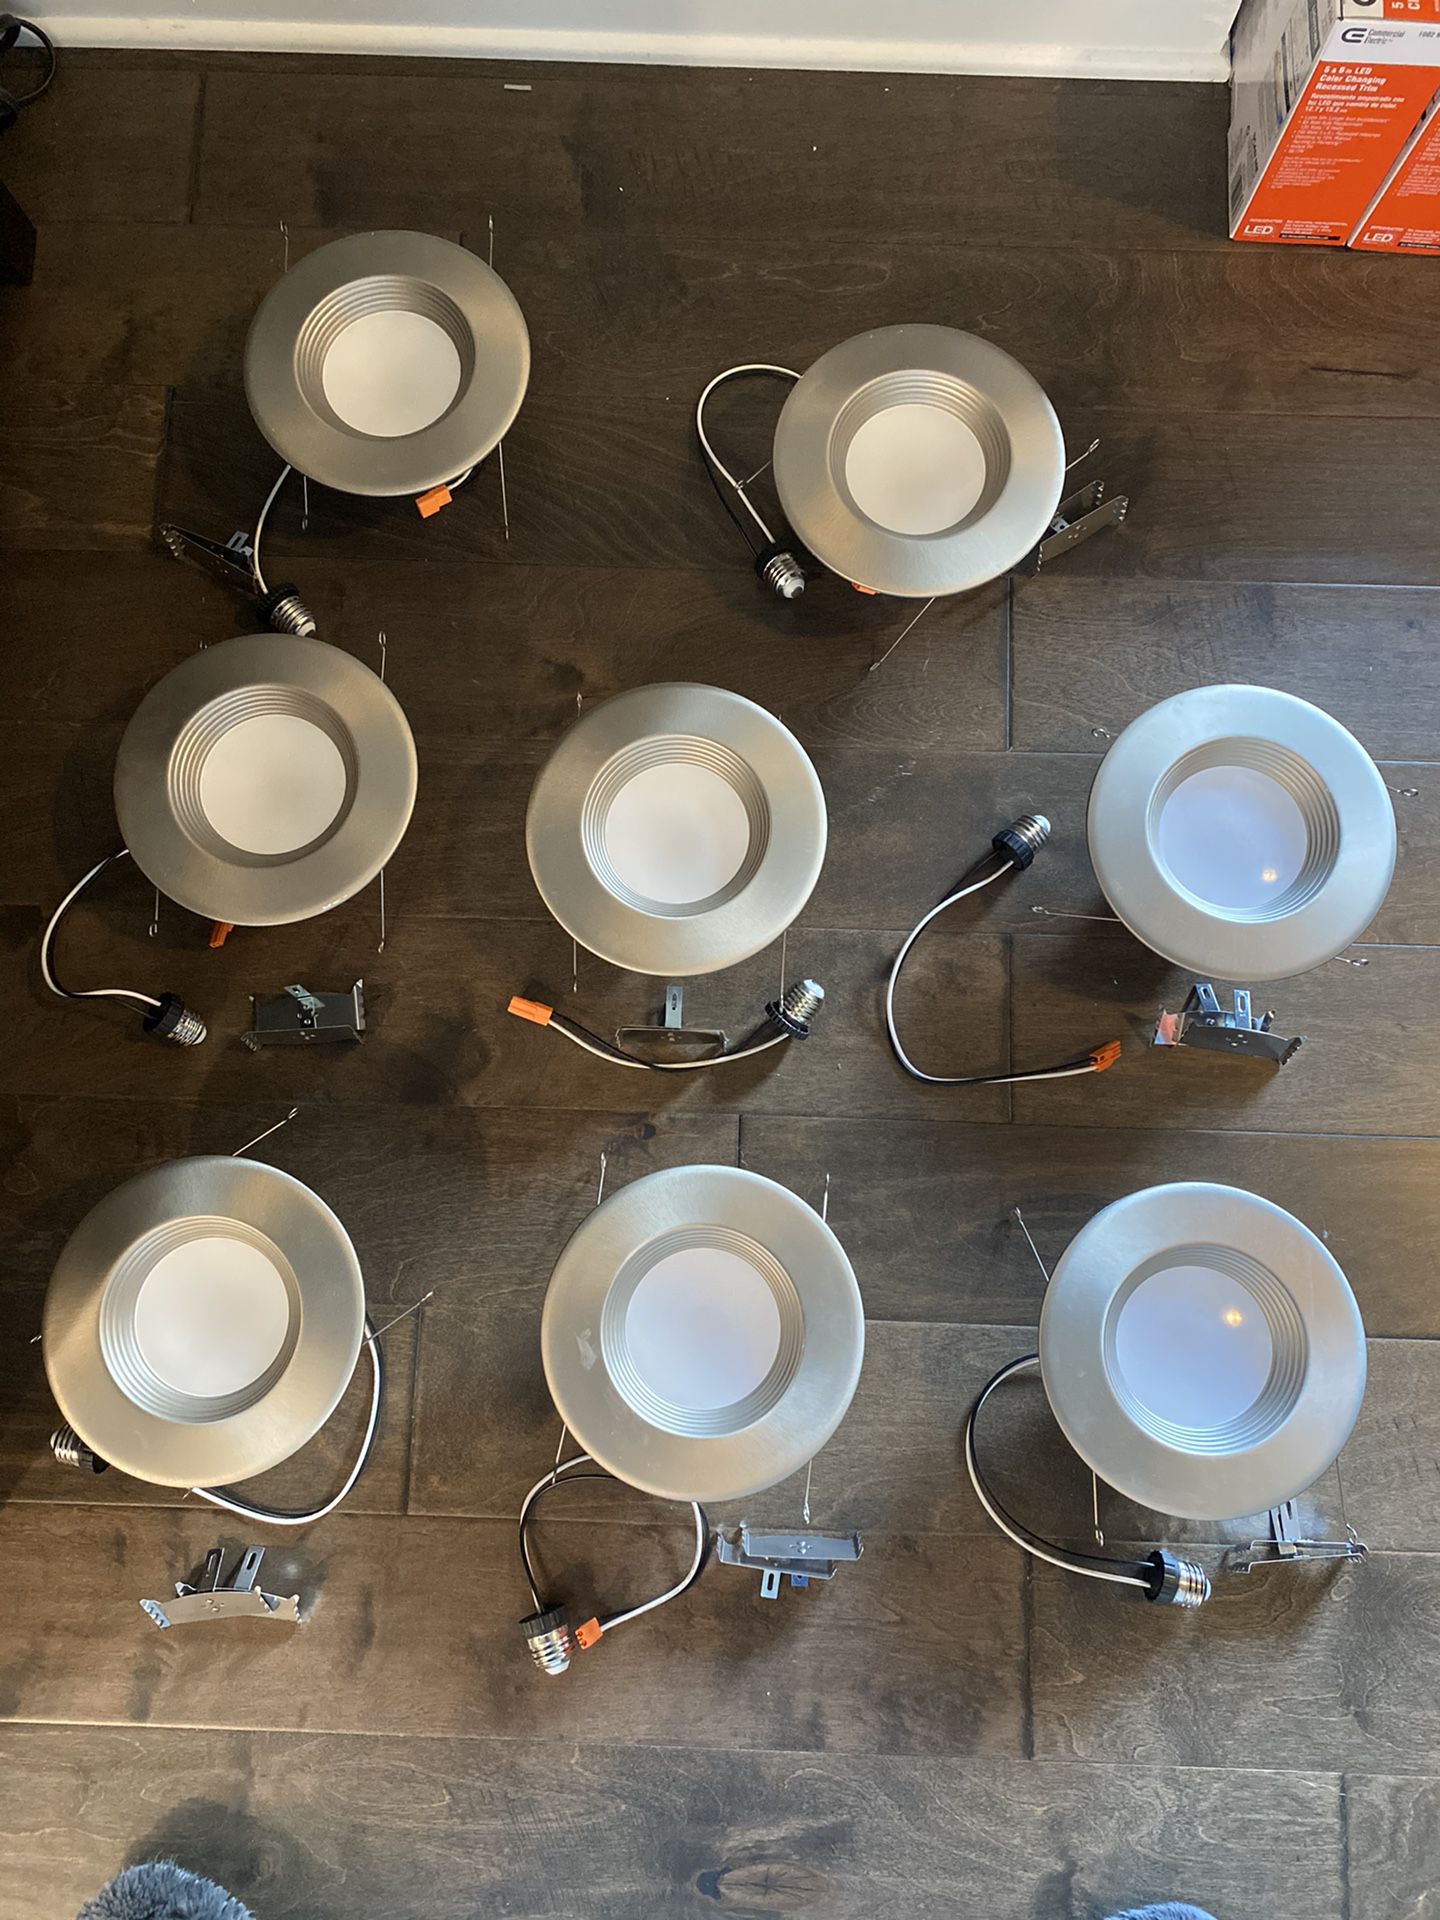 Set of 8 Recessed LED Lights 💡- Excellent Condition - Perfect for any ceiling 👌 kitchen, hallway, or bathroom